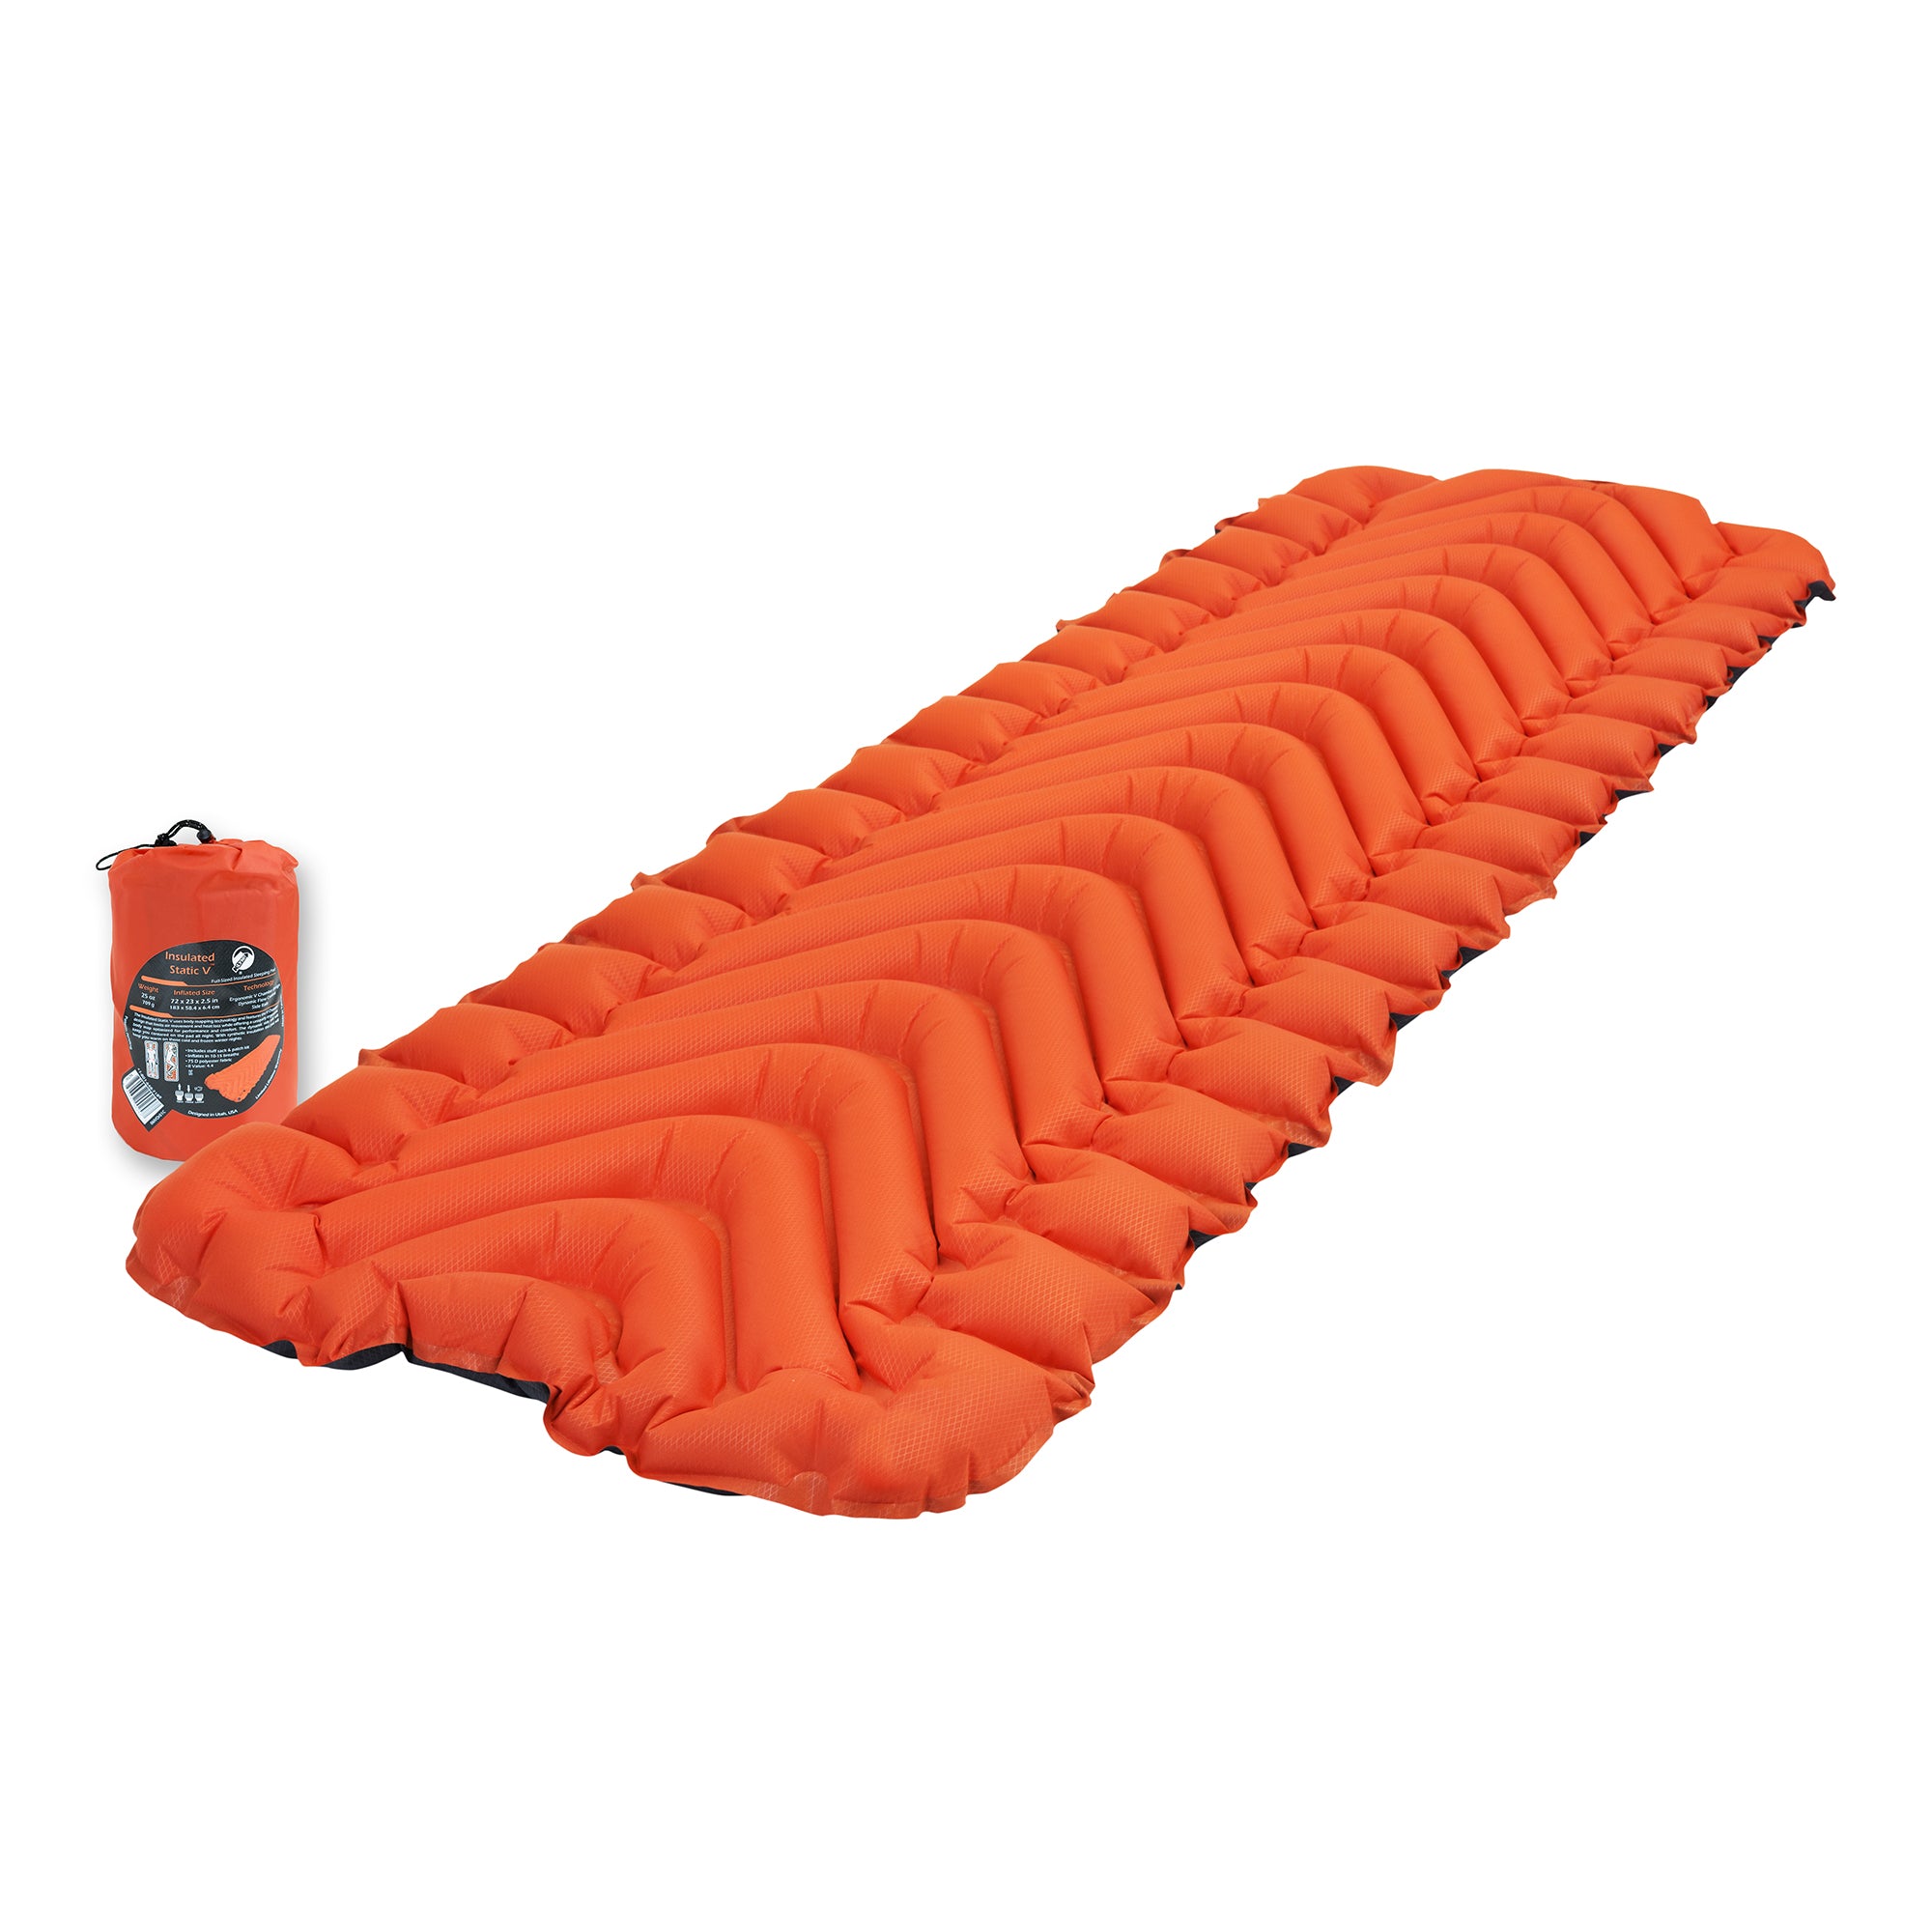 A rectangular orange inflatable sleeping pad with v shaped pattern shown at an angle on the ground next to its stuff sack.